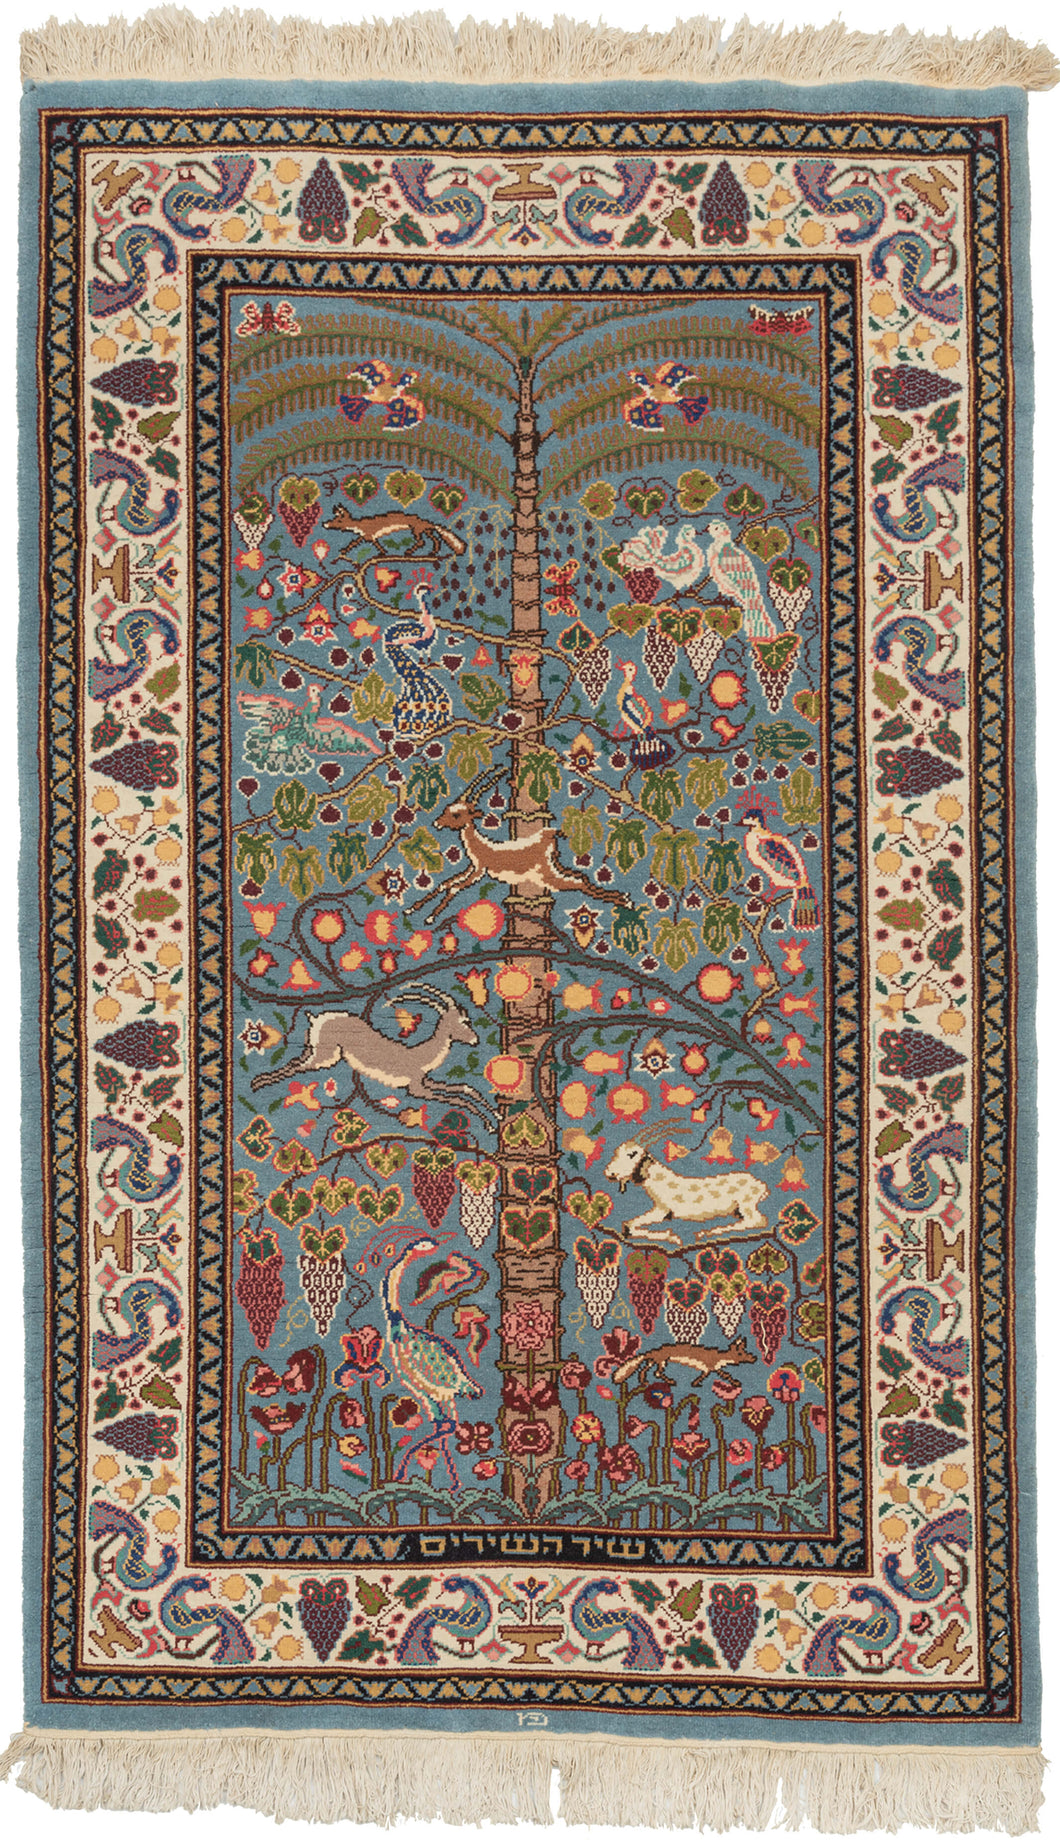 This Bezalel rug was handwoven in Israel during the late 20th century.   It features a tree of life design r. Framed by a border of alternating peacocks flanking vases. 